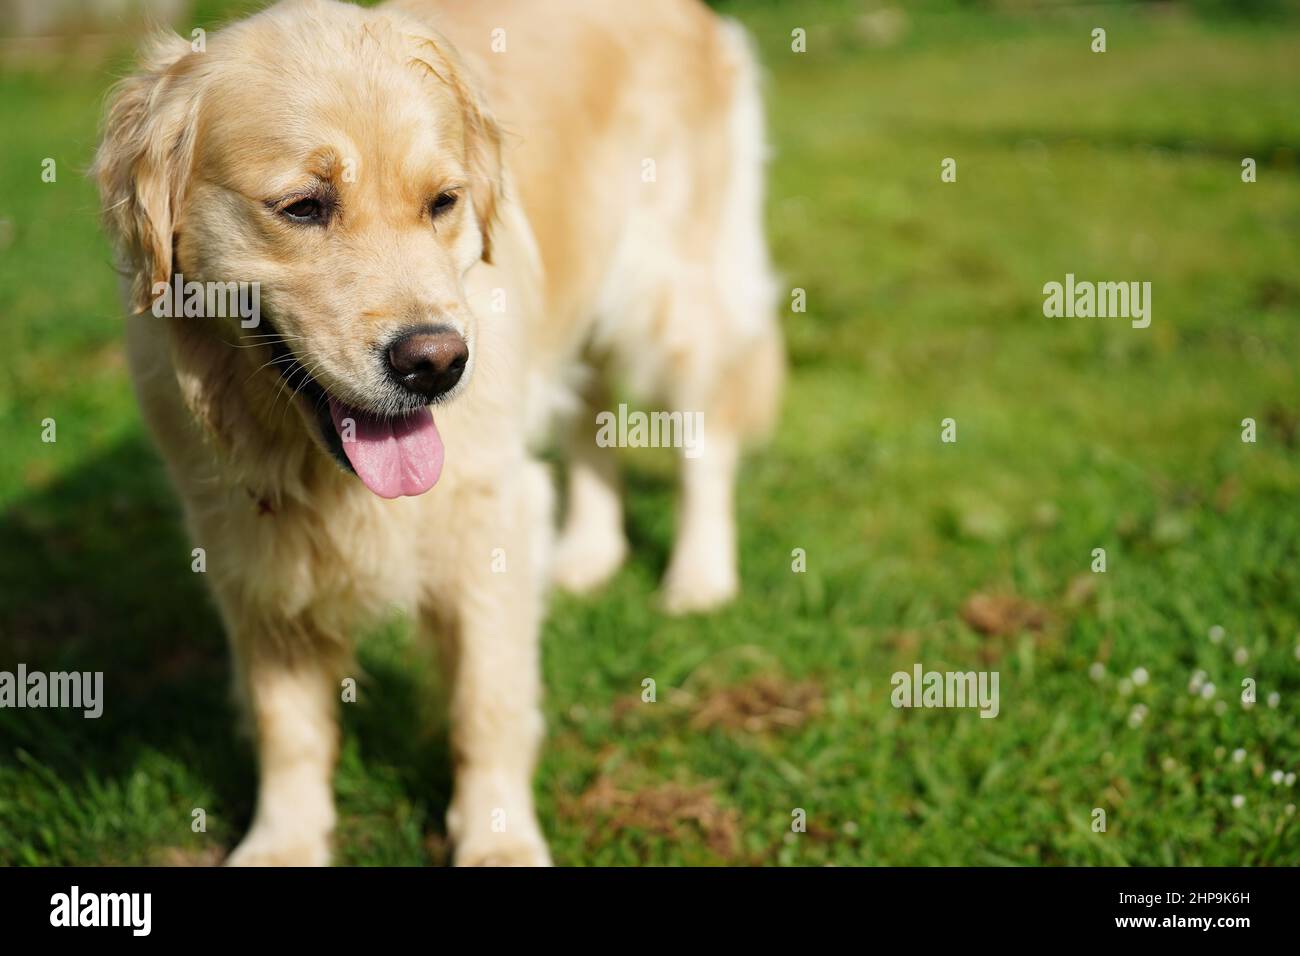 A golden retriever dog with a happy look on it's face Stock Photo